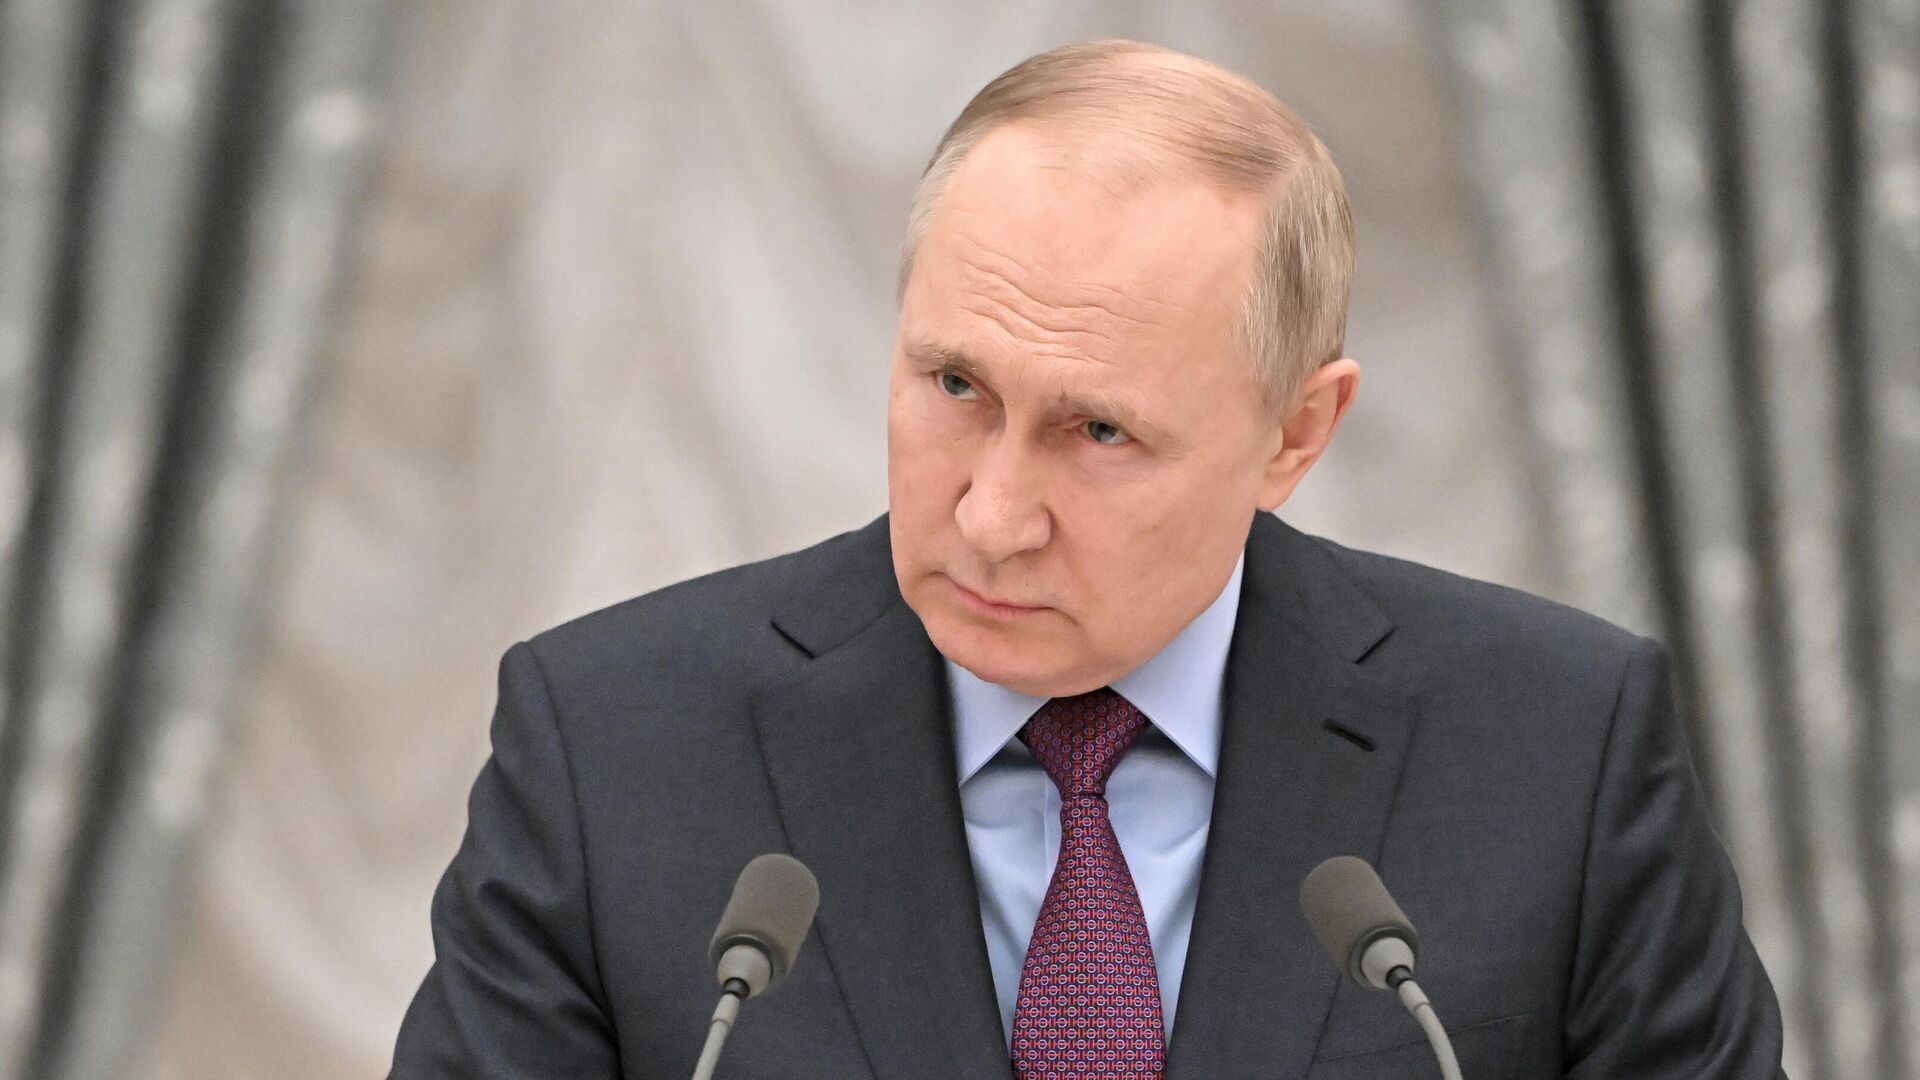 Putin says Russia just starting in Ukraine, peace talks will get harder with time